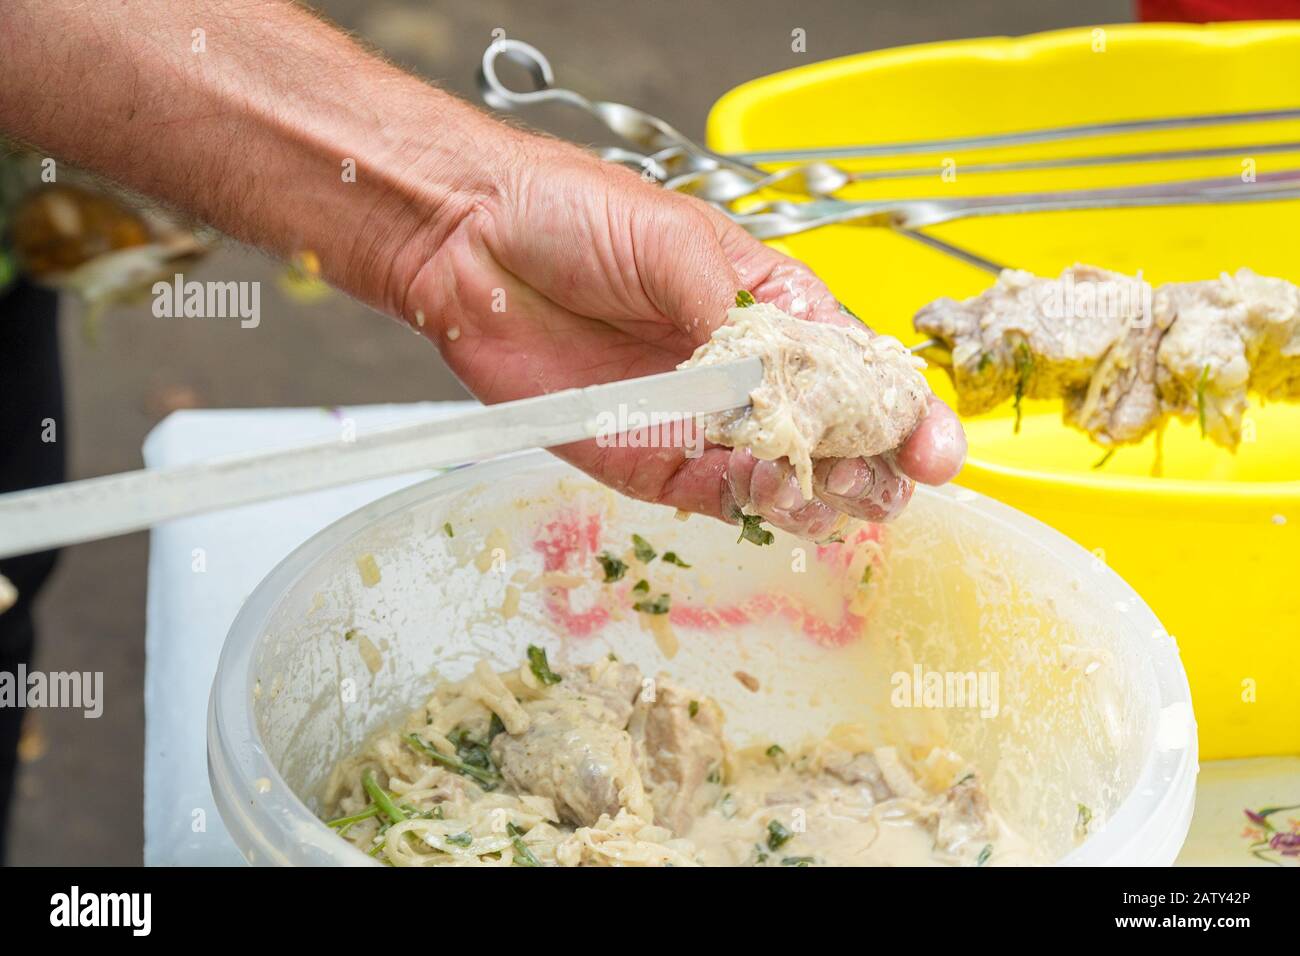 Man stringing marinated meat on a skewer for barbecue Stock Photo